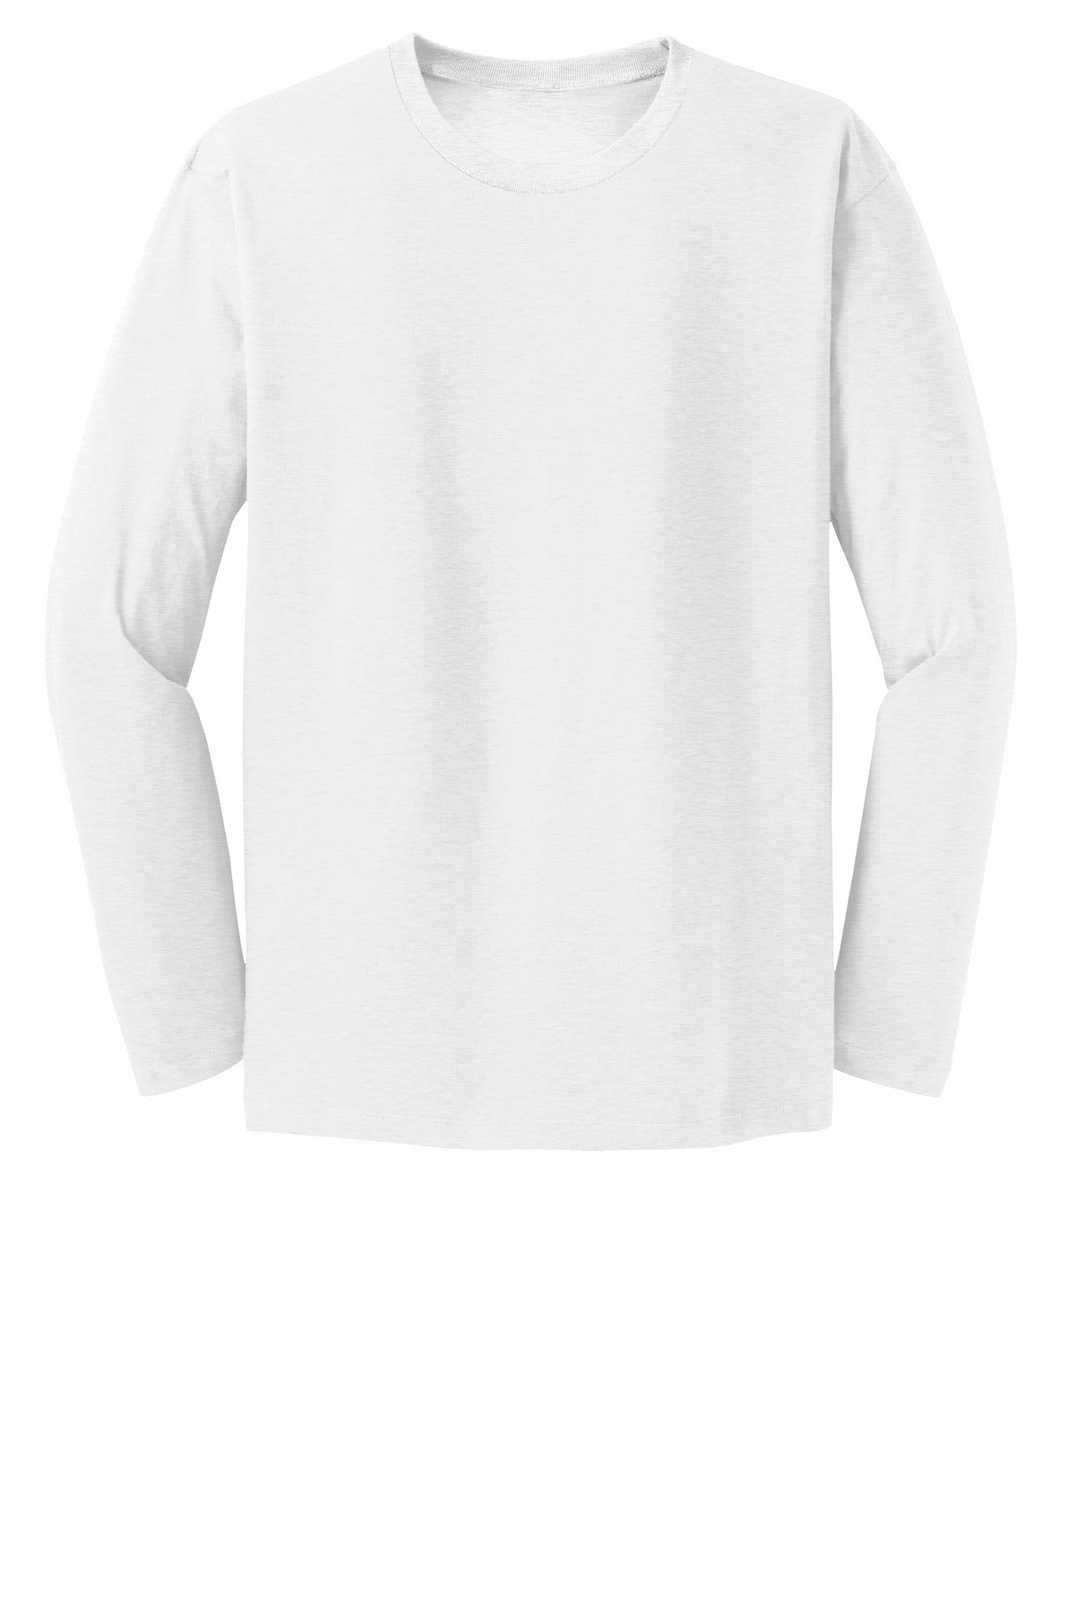 District DT6200 Very Important Tee Long Sleeve - White - HIT a Double - 4